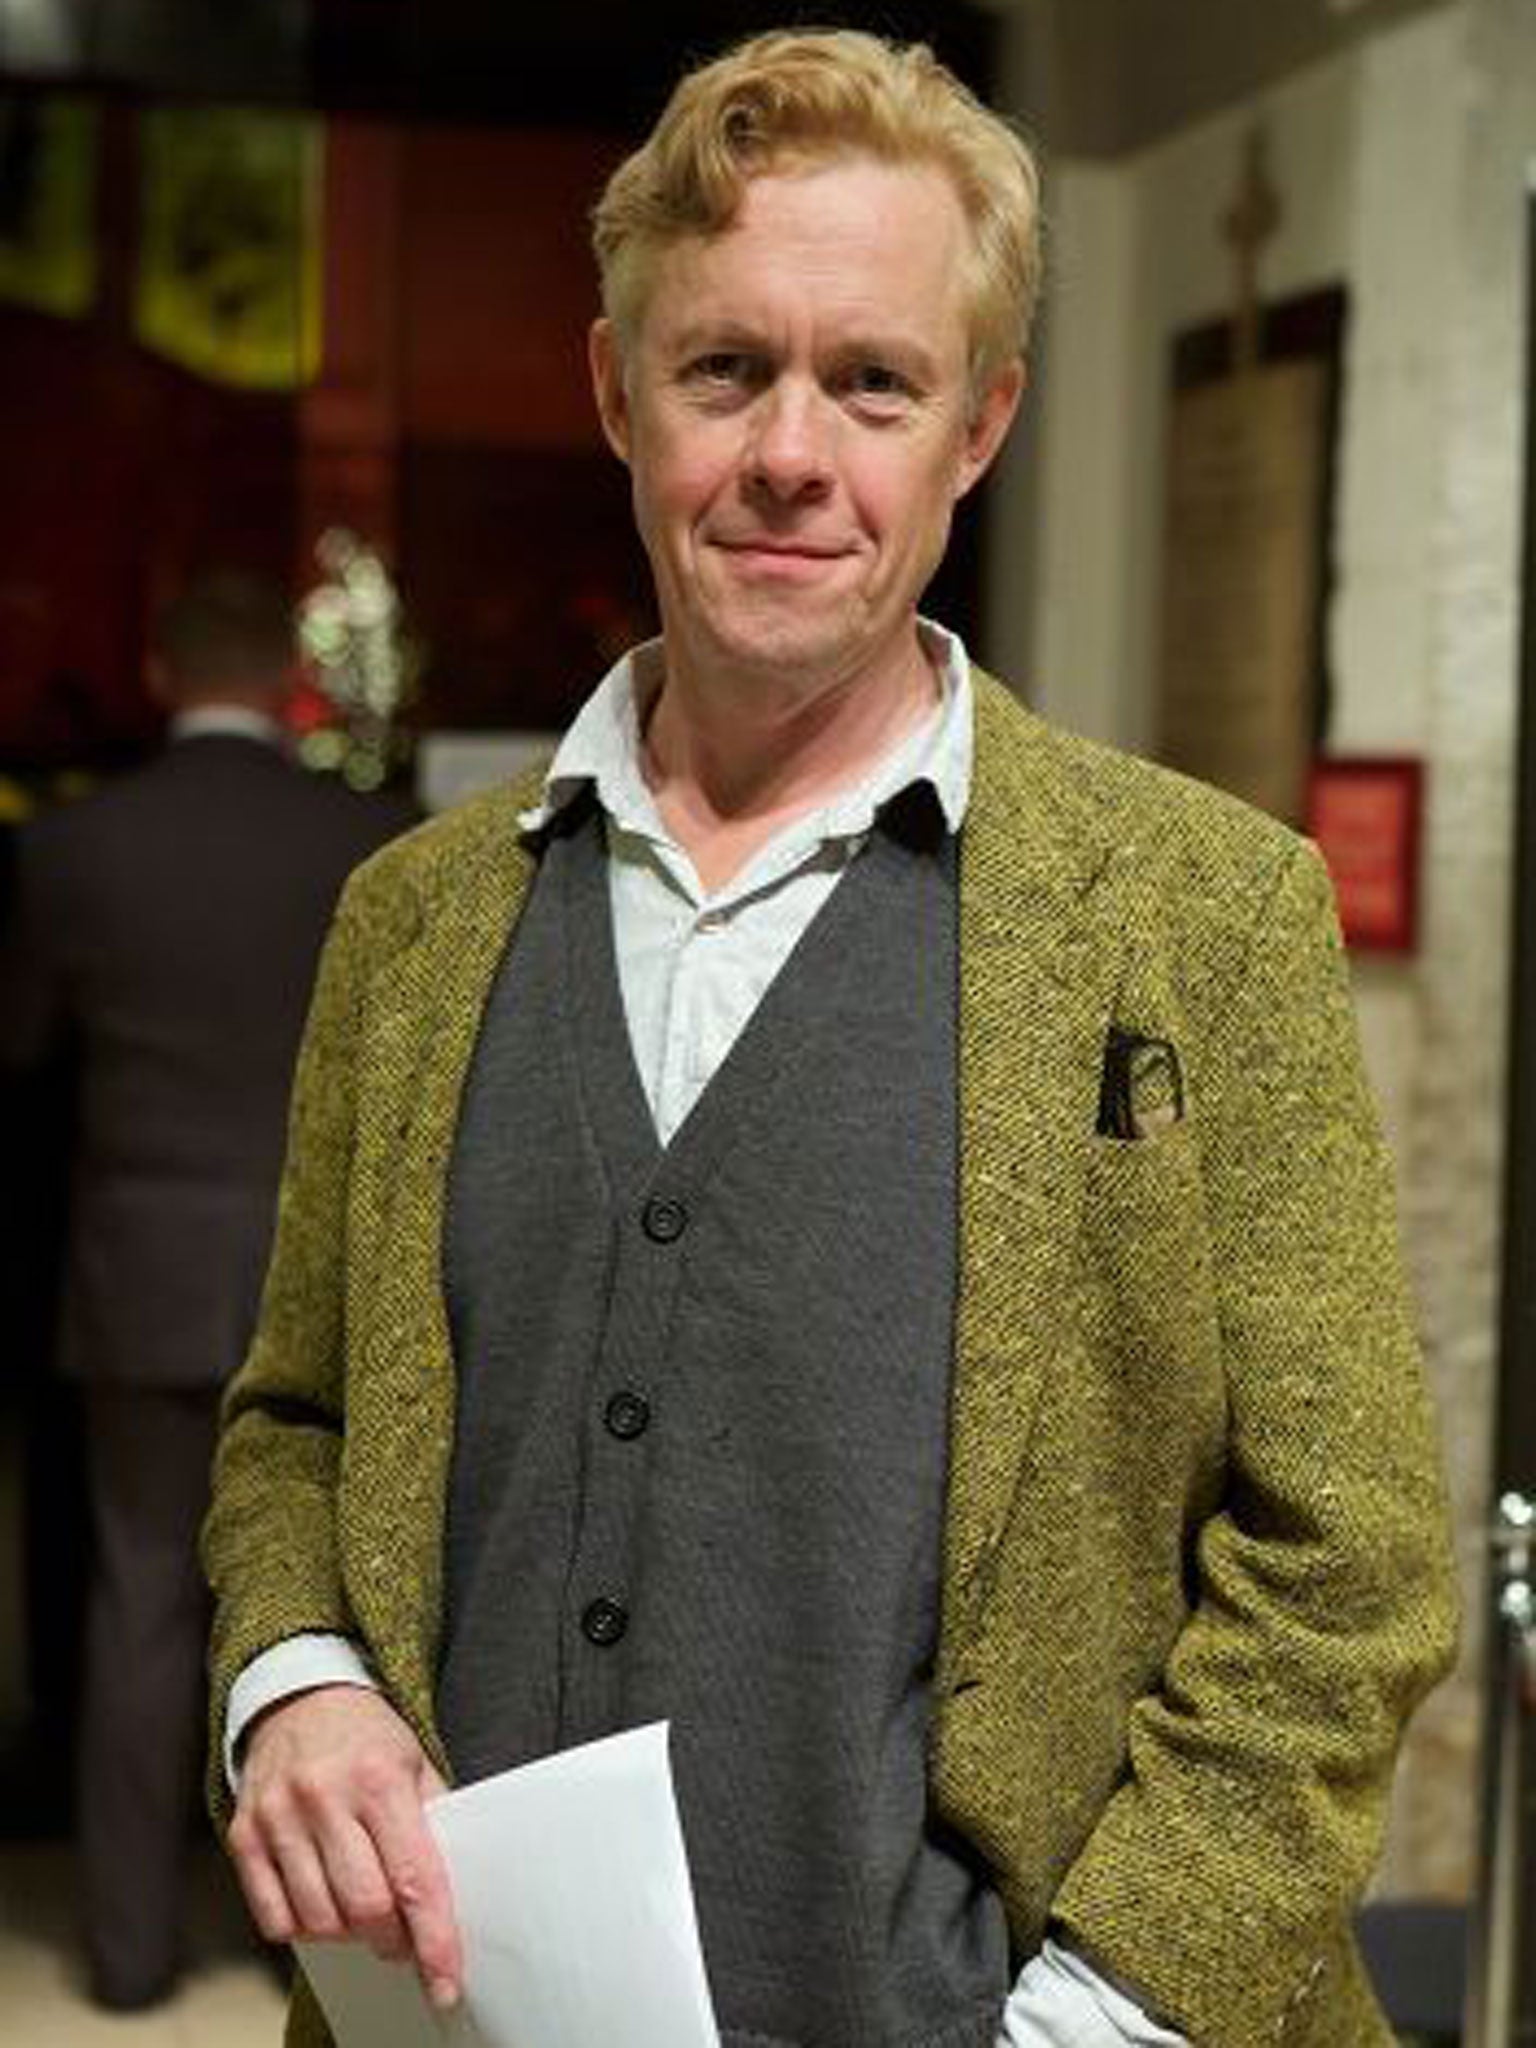 Charlie and the Chocolate Factory marks the return of Alex Jennings to the musical genre